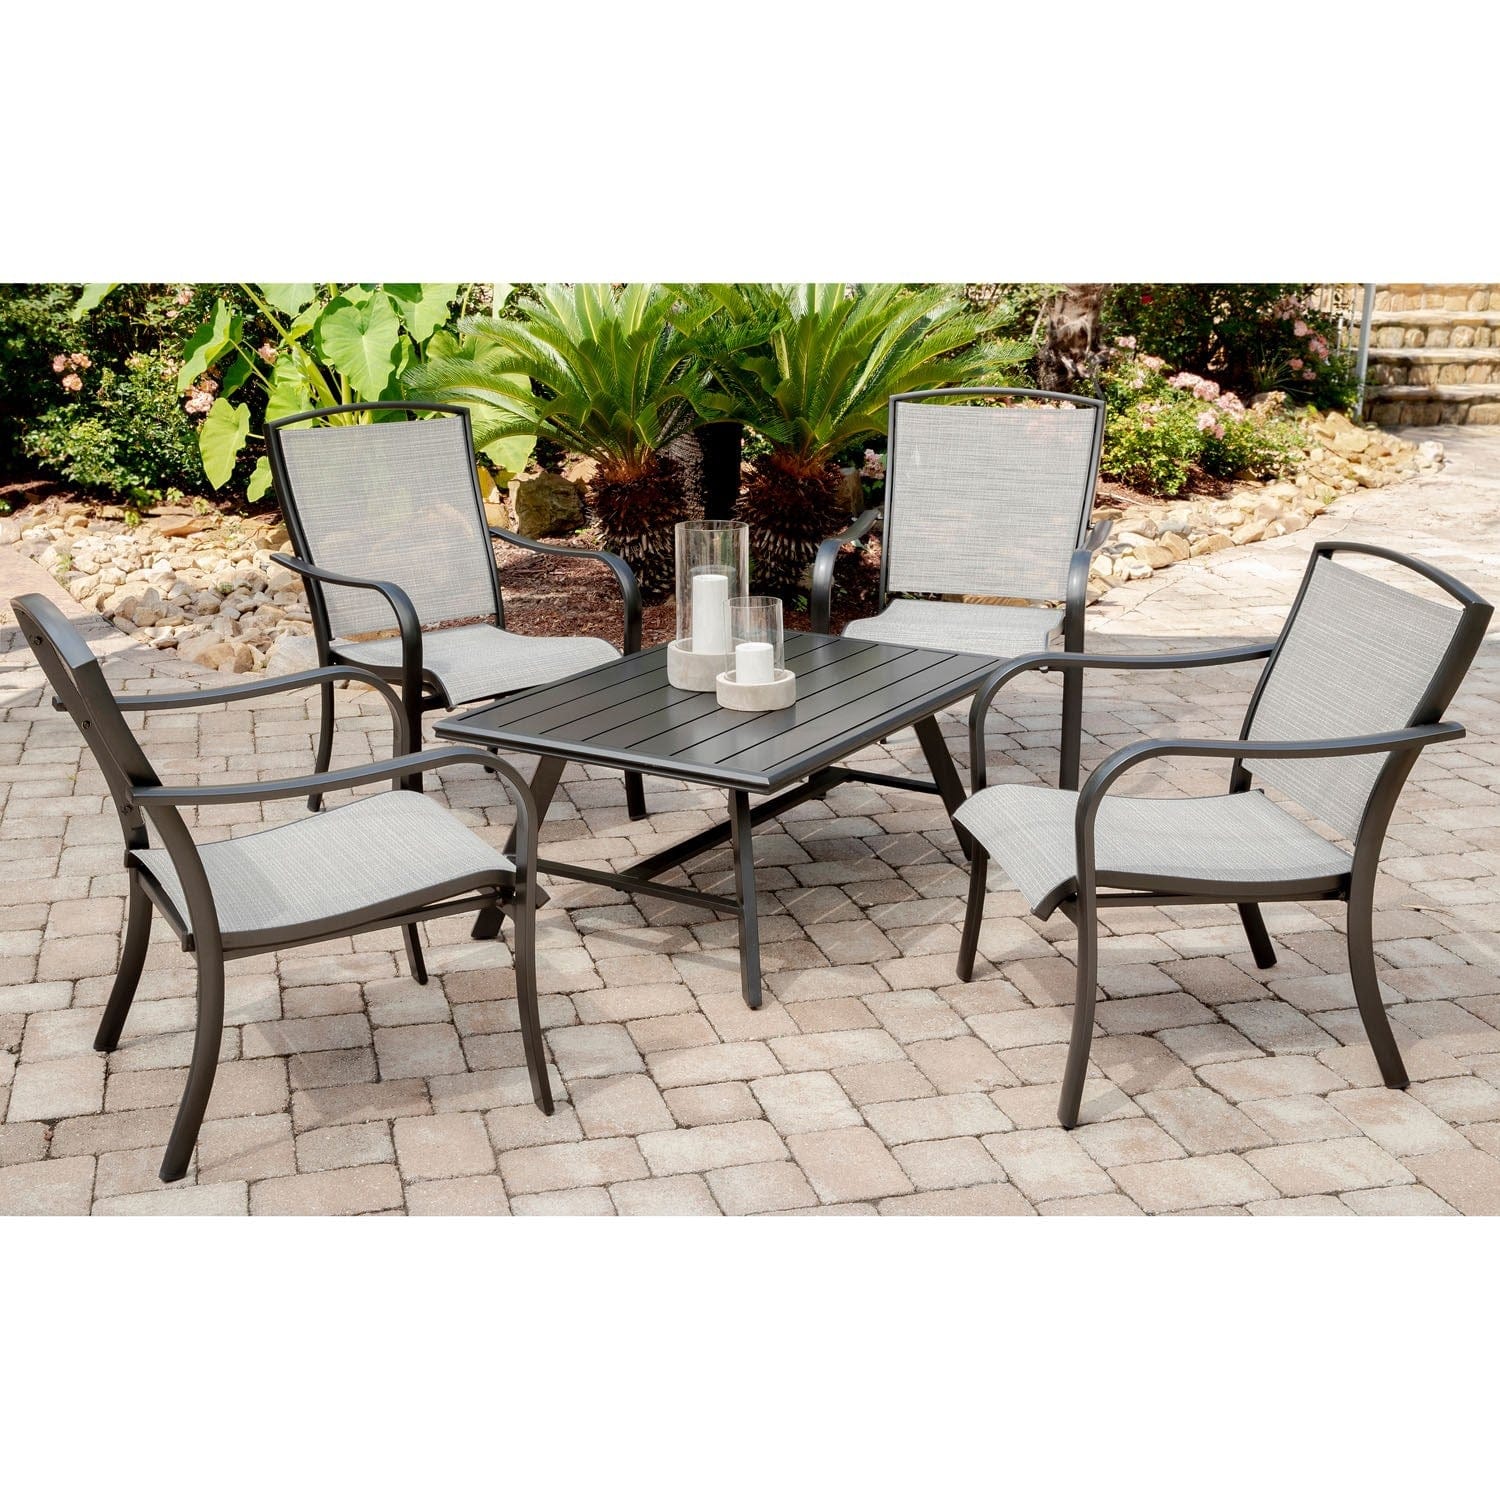 Hanover Conversation Set Hanover - Foxhill 5pc Seating Set: 4 Sling Chairs and Slat Coffee Table | FOXHILL5PCCT-GRY